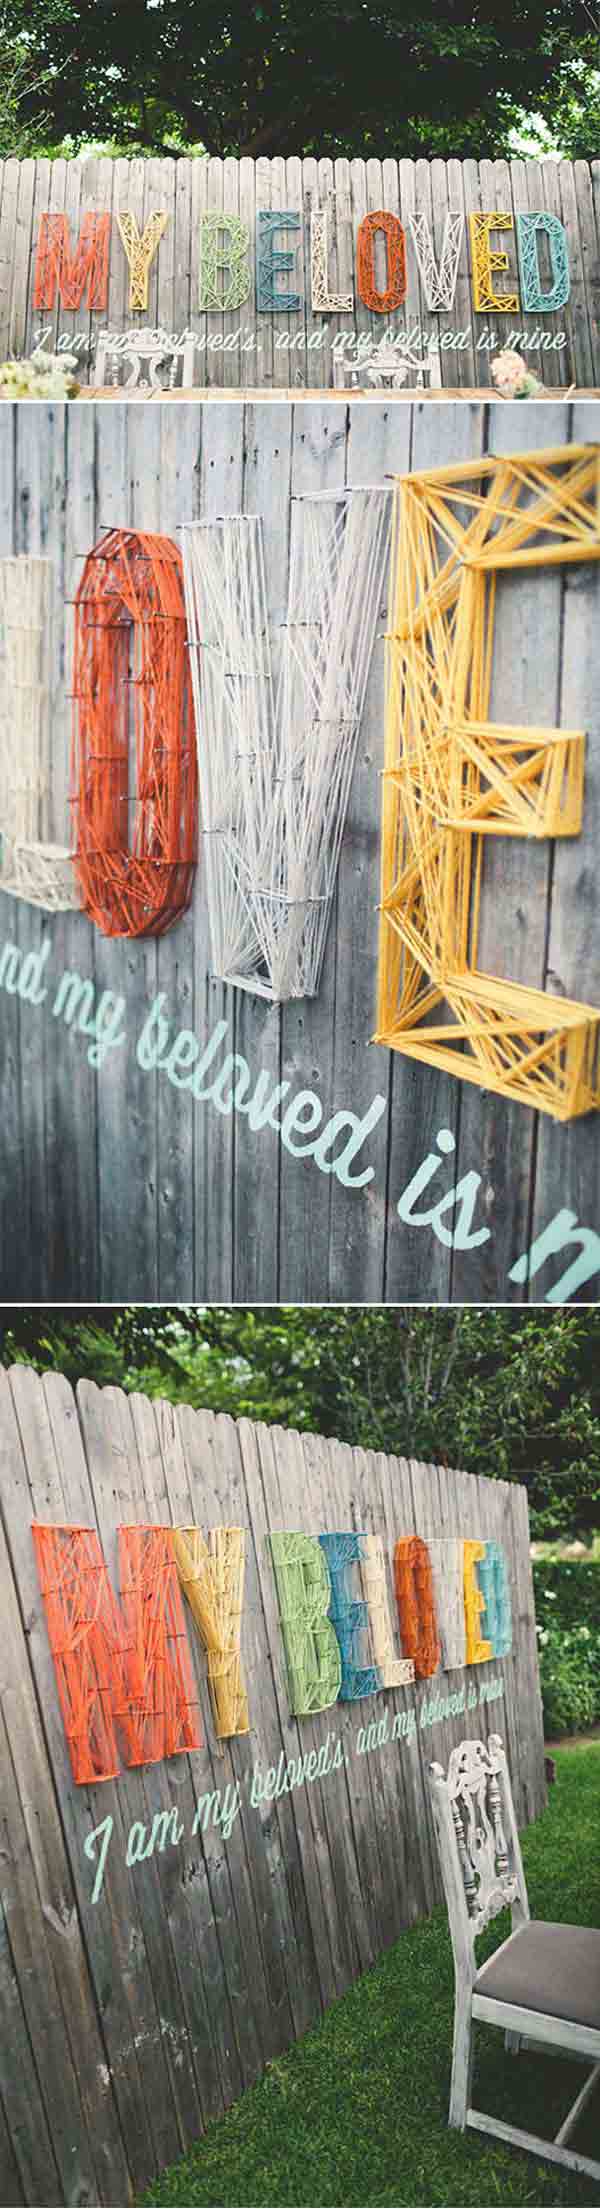 Get Creative With These 23 Fence Decorating Ideas and Transform Your Backyard homesthetics design (16)